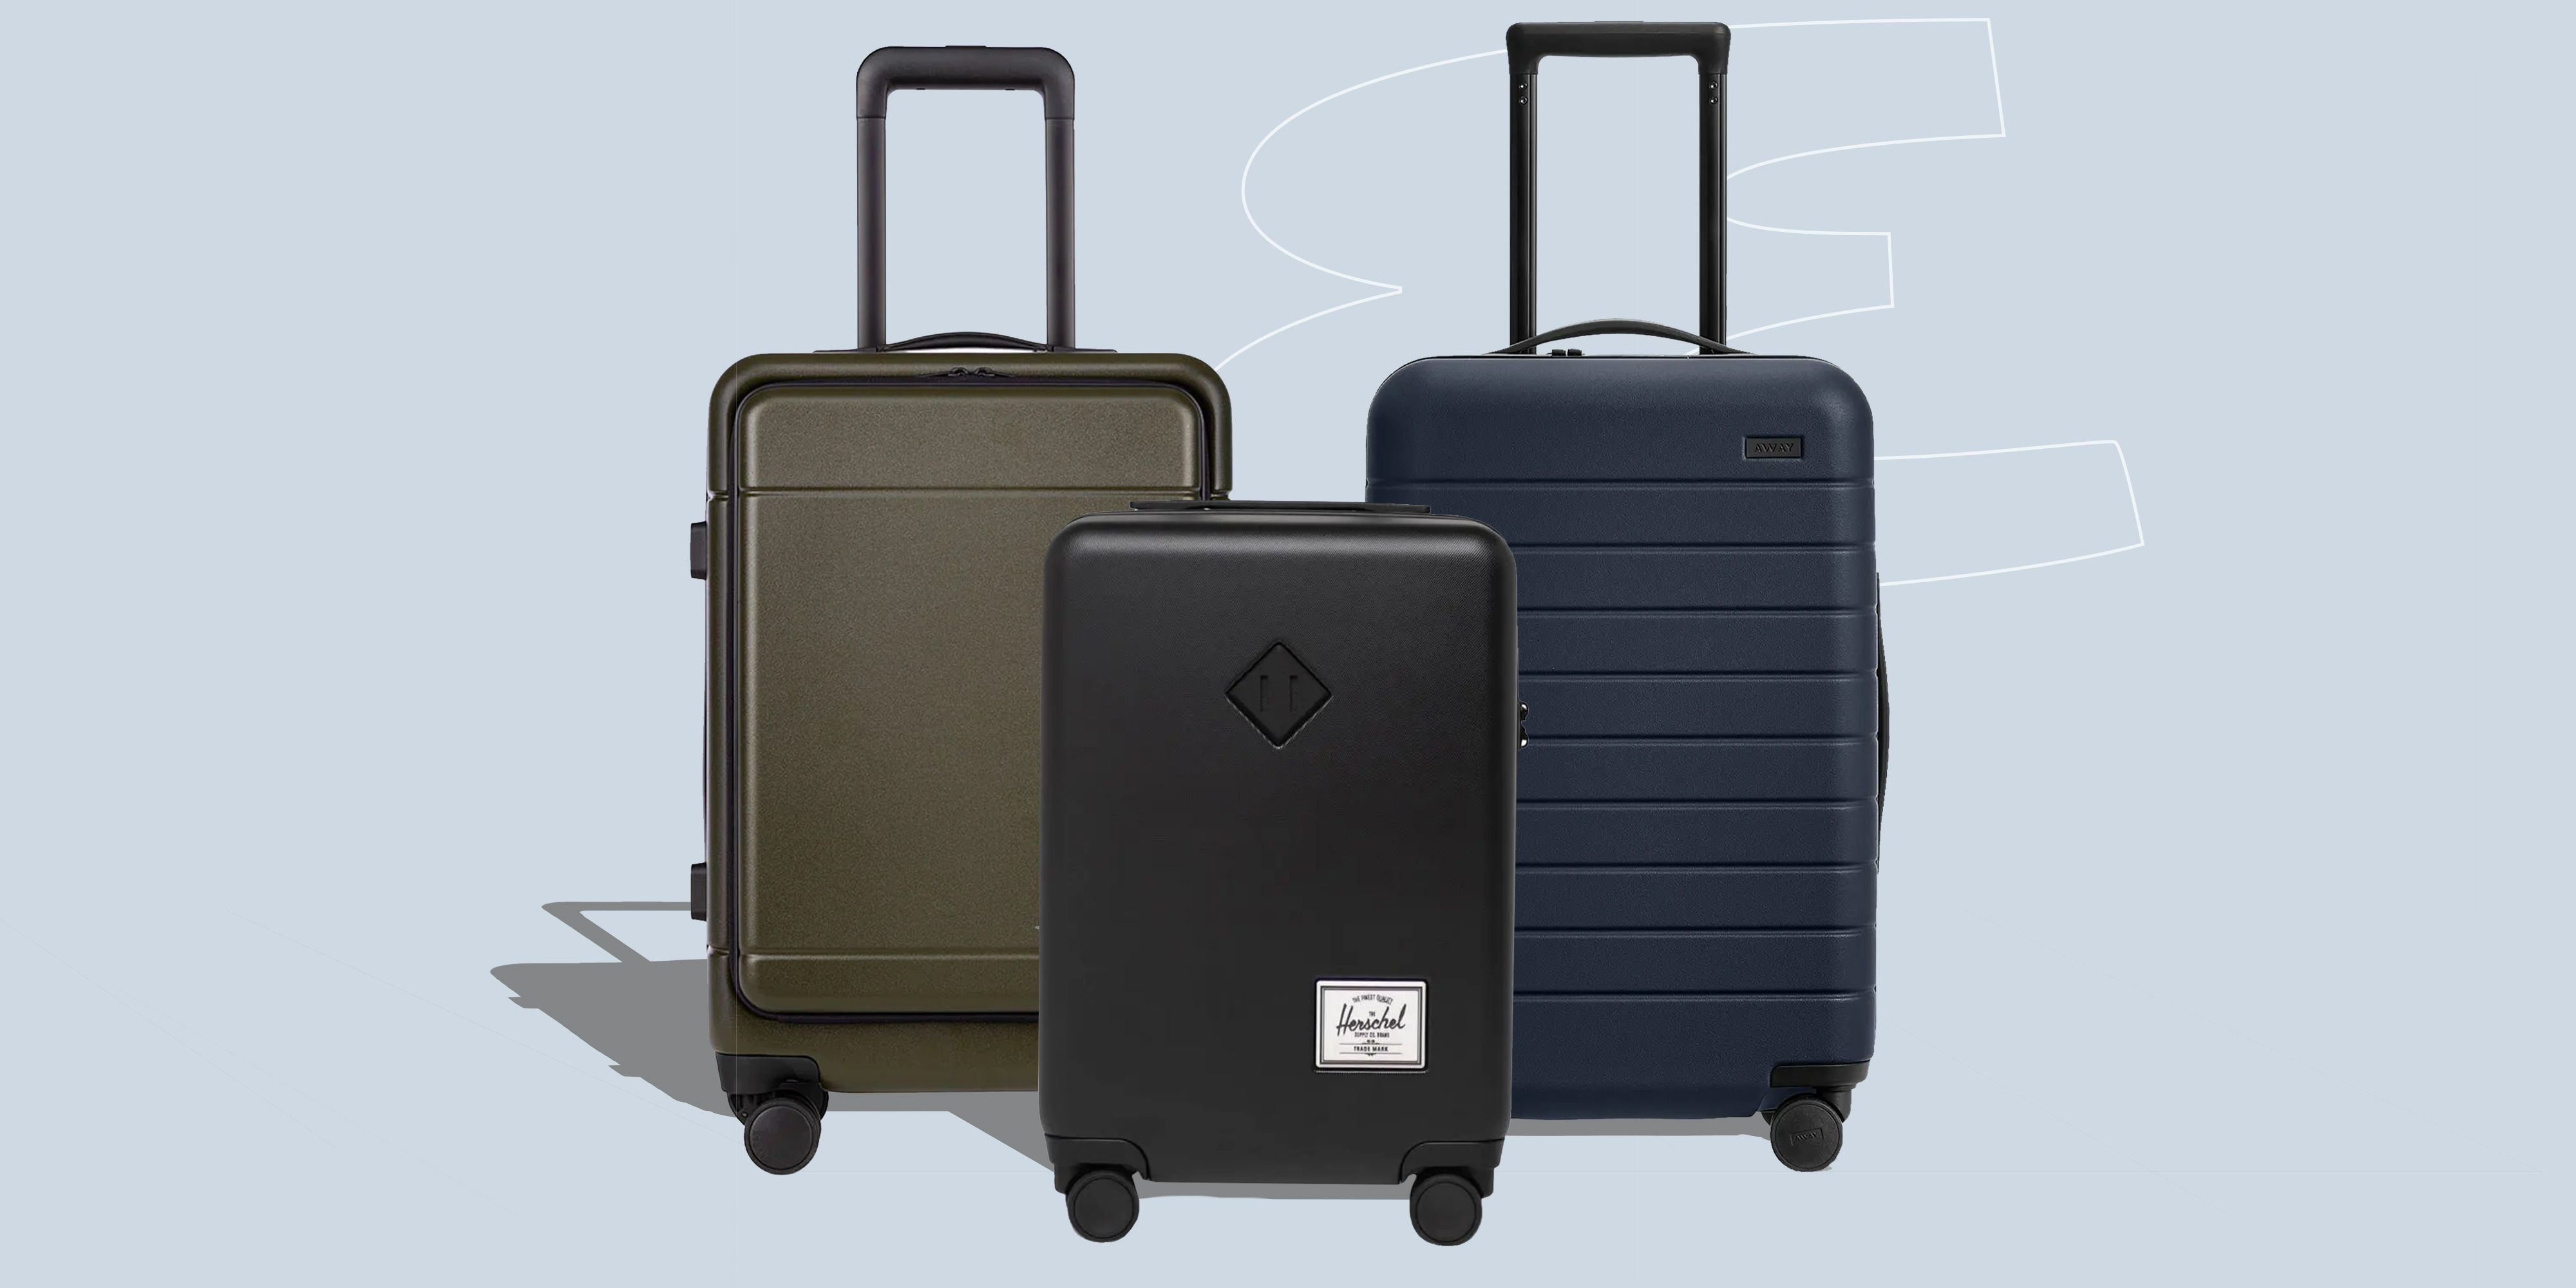 Is Away Carry-On Luggage Worth the Price?